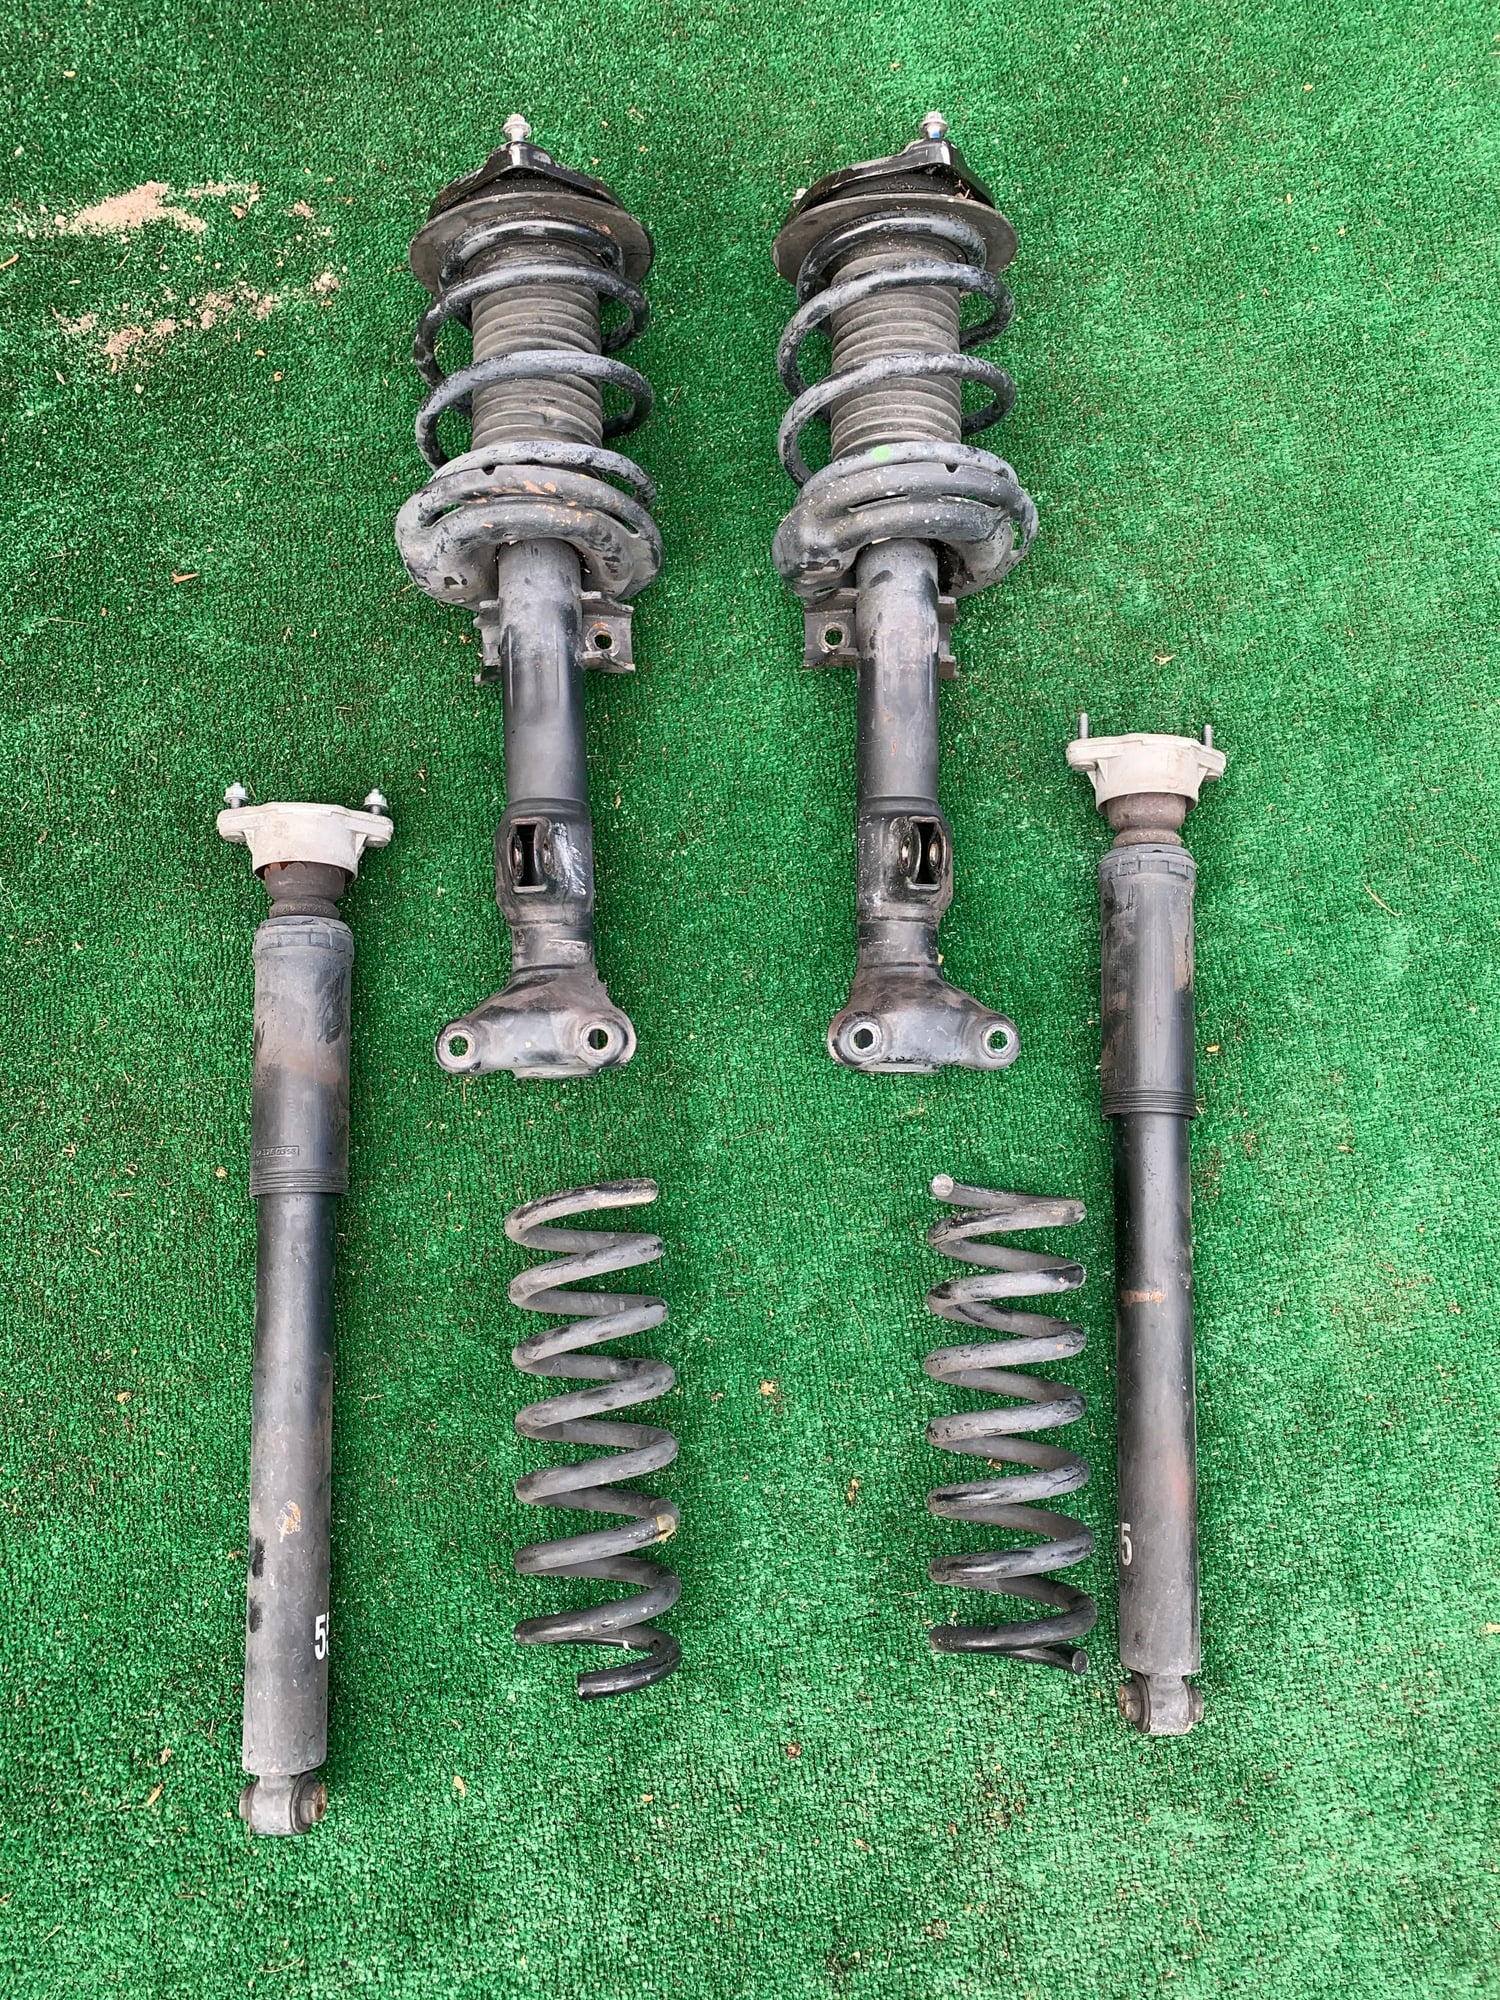 Steering/Suspension - Full Suspension (Front Struts, Rear Absorber, and Springs) 2014 C63 Coupe - Used - 2014 Mercedes-Benz C63 AMG - Boca Raton, FL 33434, United States